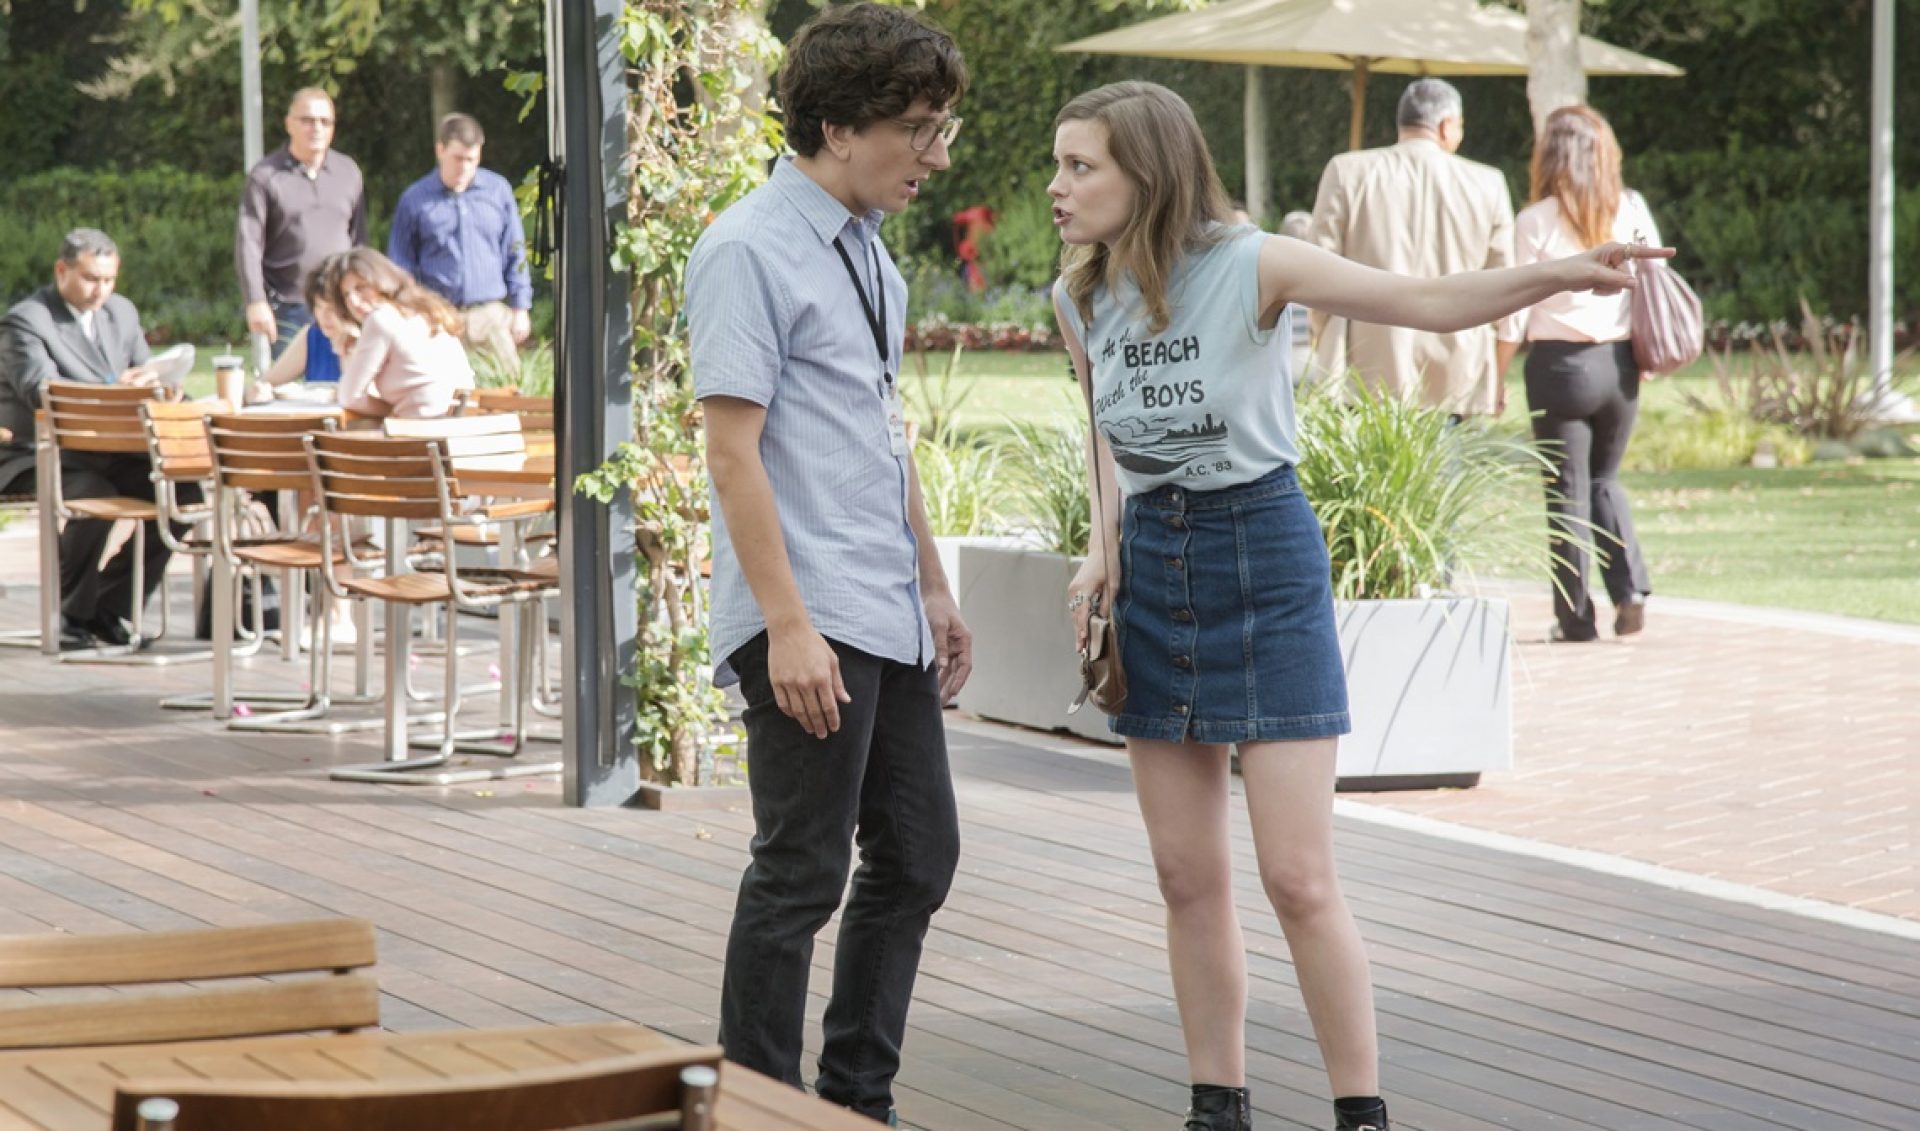 Judd Apatow’s ‘Love’ Gets February 19th Release Date On Netflix